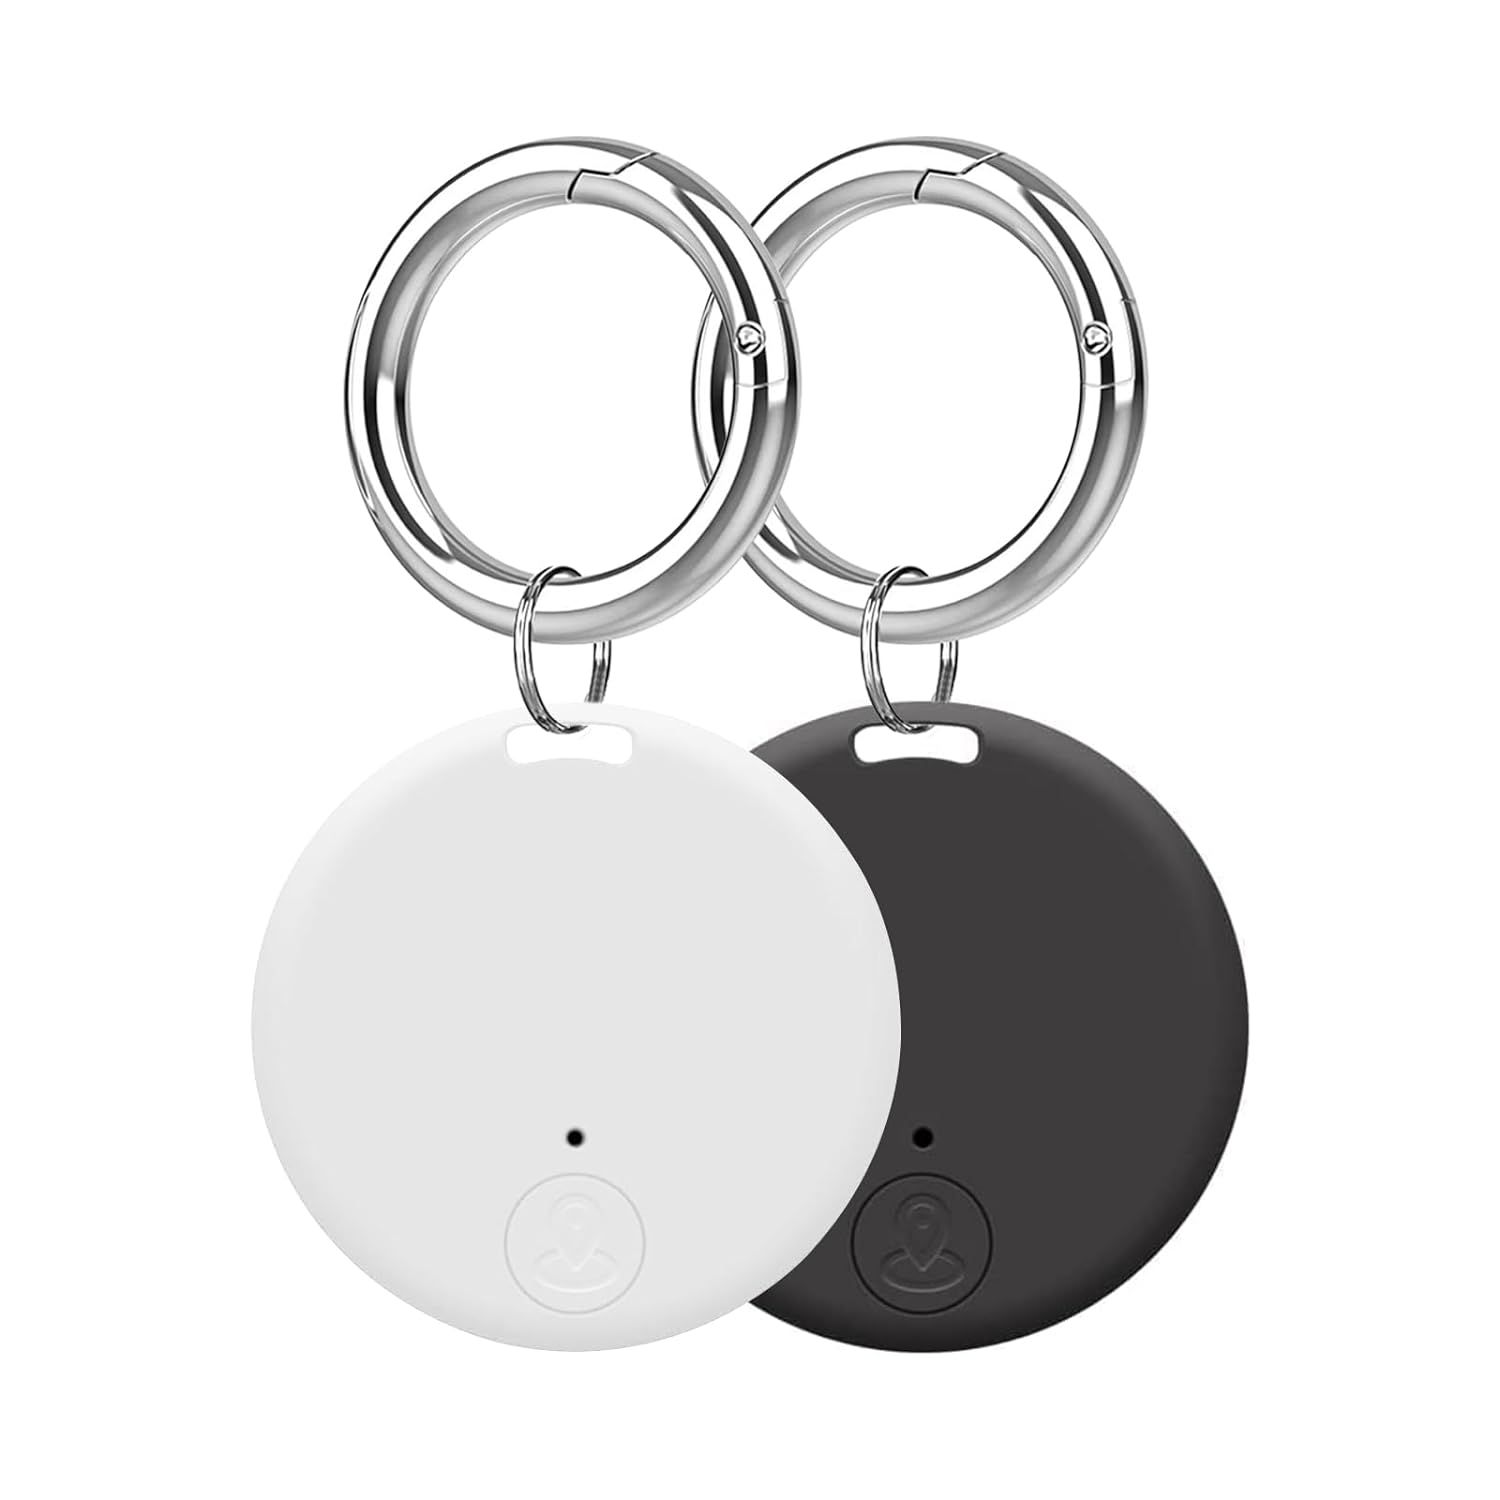 Aircawin Mini GPS Tracker, Key Item Finder Locator,No Monthly Fee App for iOS/Android 2023 Latest,Portable Anti-Lost Bluetooth Tag Item Tracker for Luggages/Kids/Pets/Phone/Wallet/Bag-2Pcs-Black+White